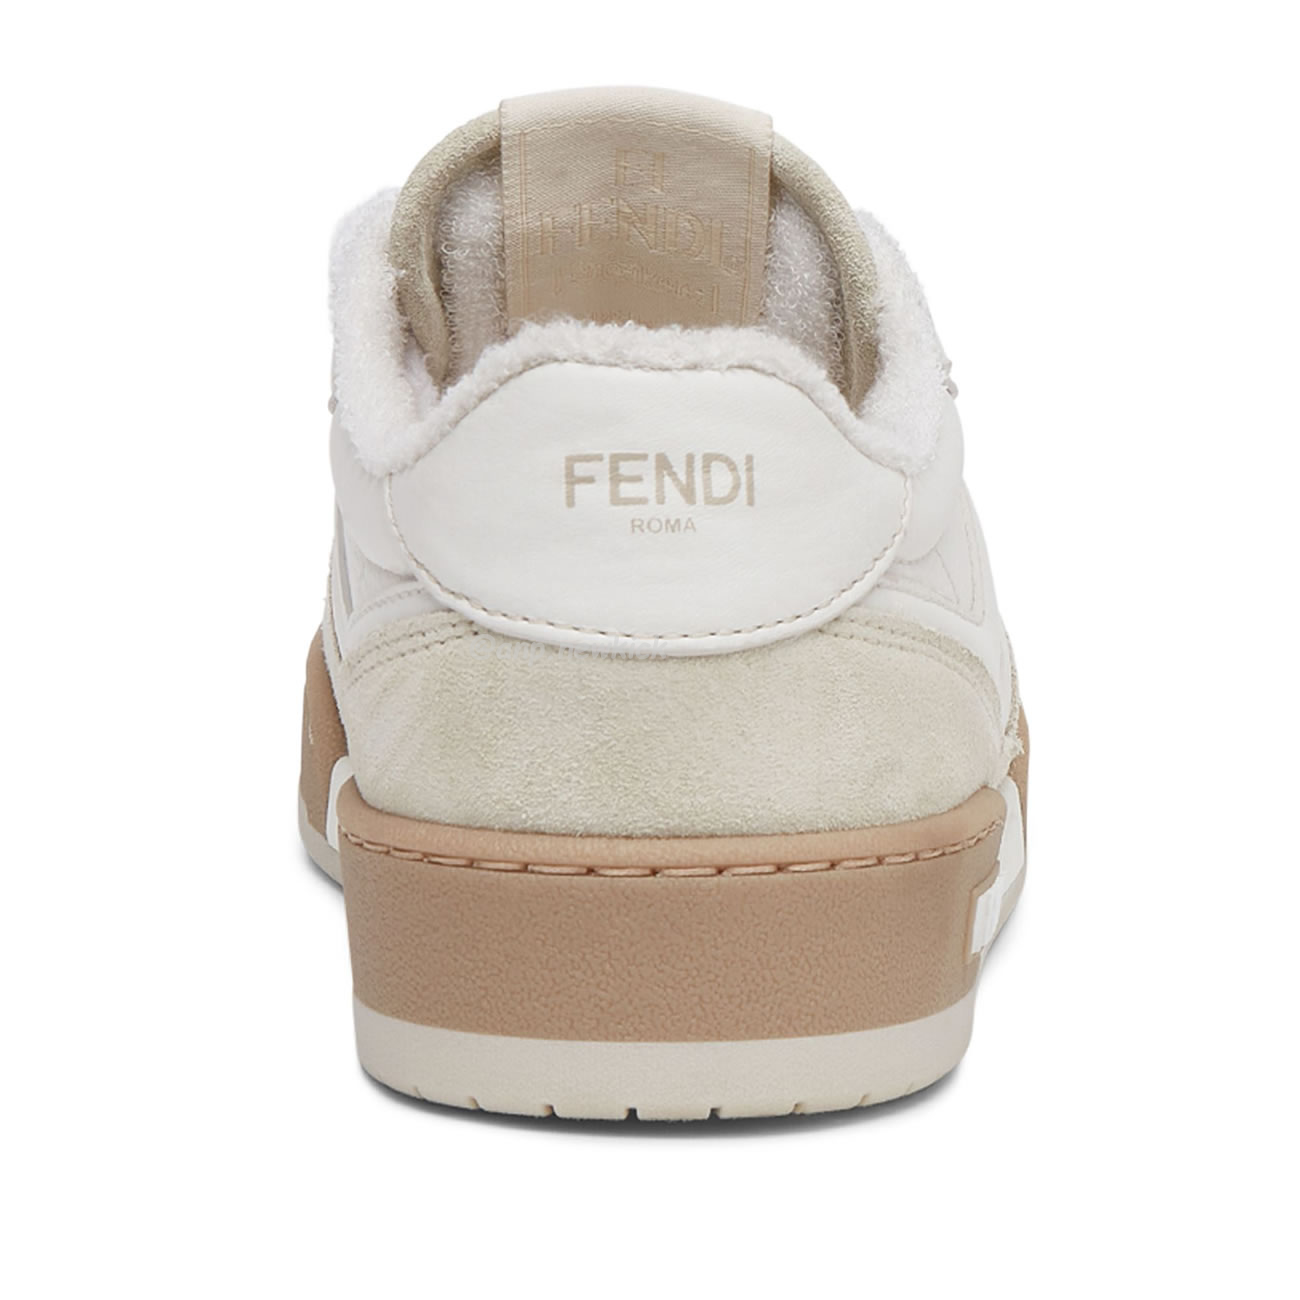 Fendi Match Cream Black White Suede And Leather Low Top Sneakers (5) - newkick.org